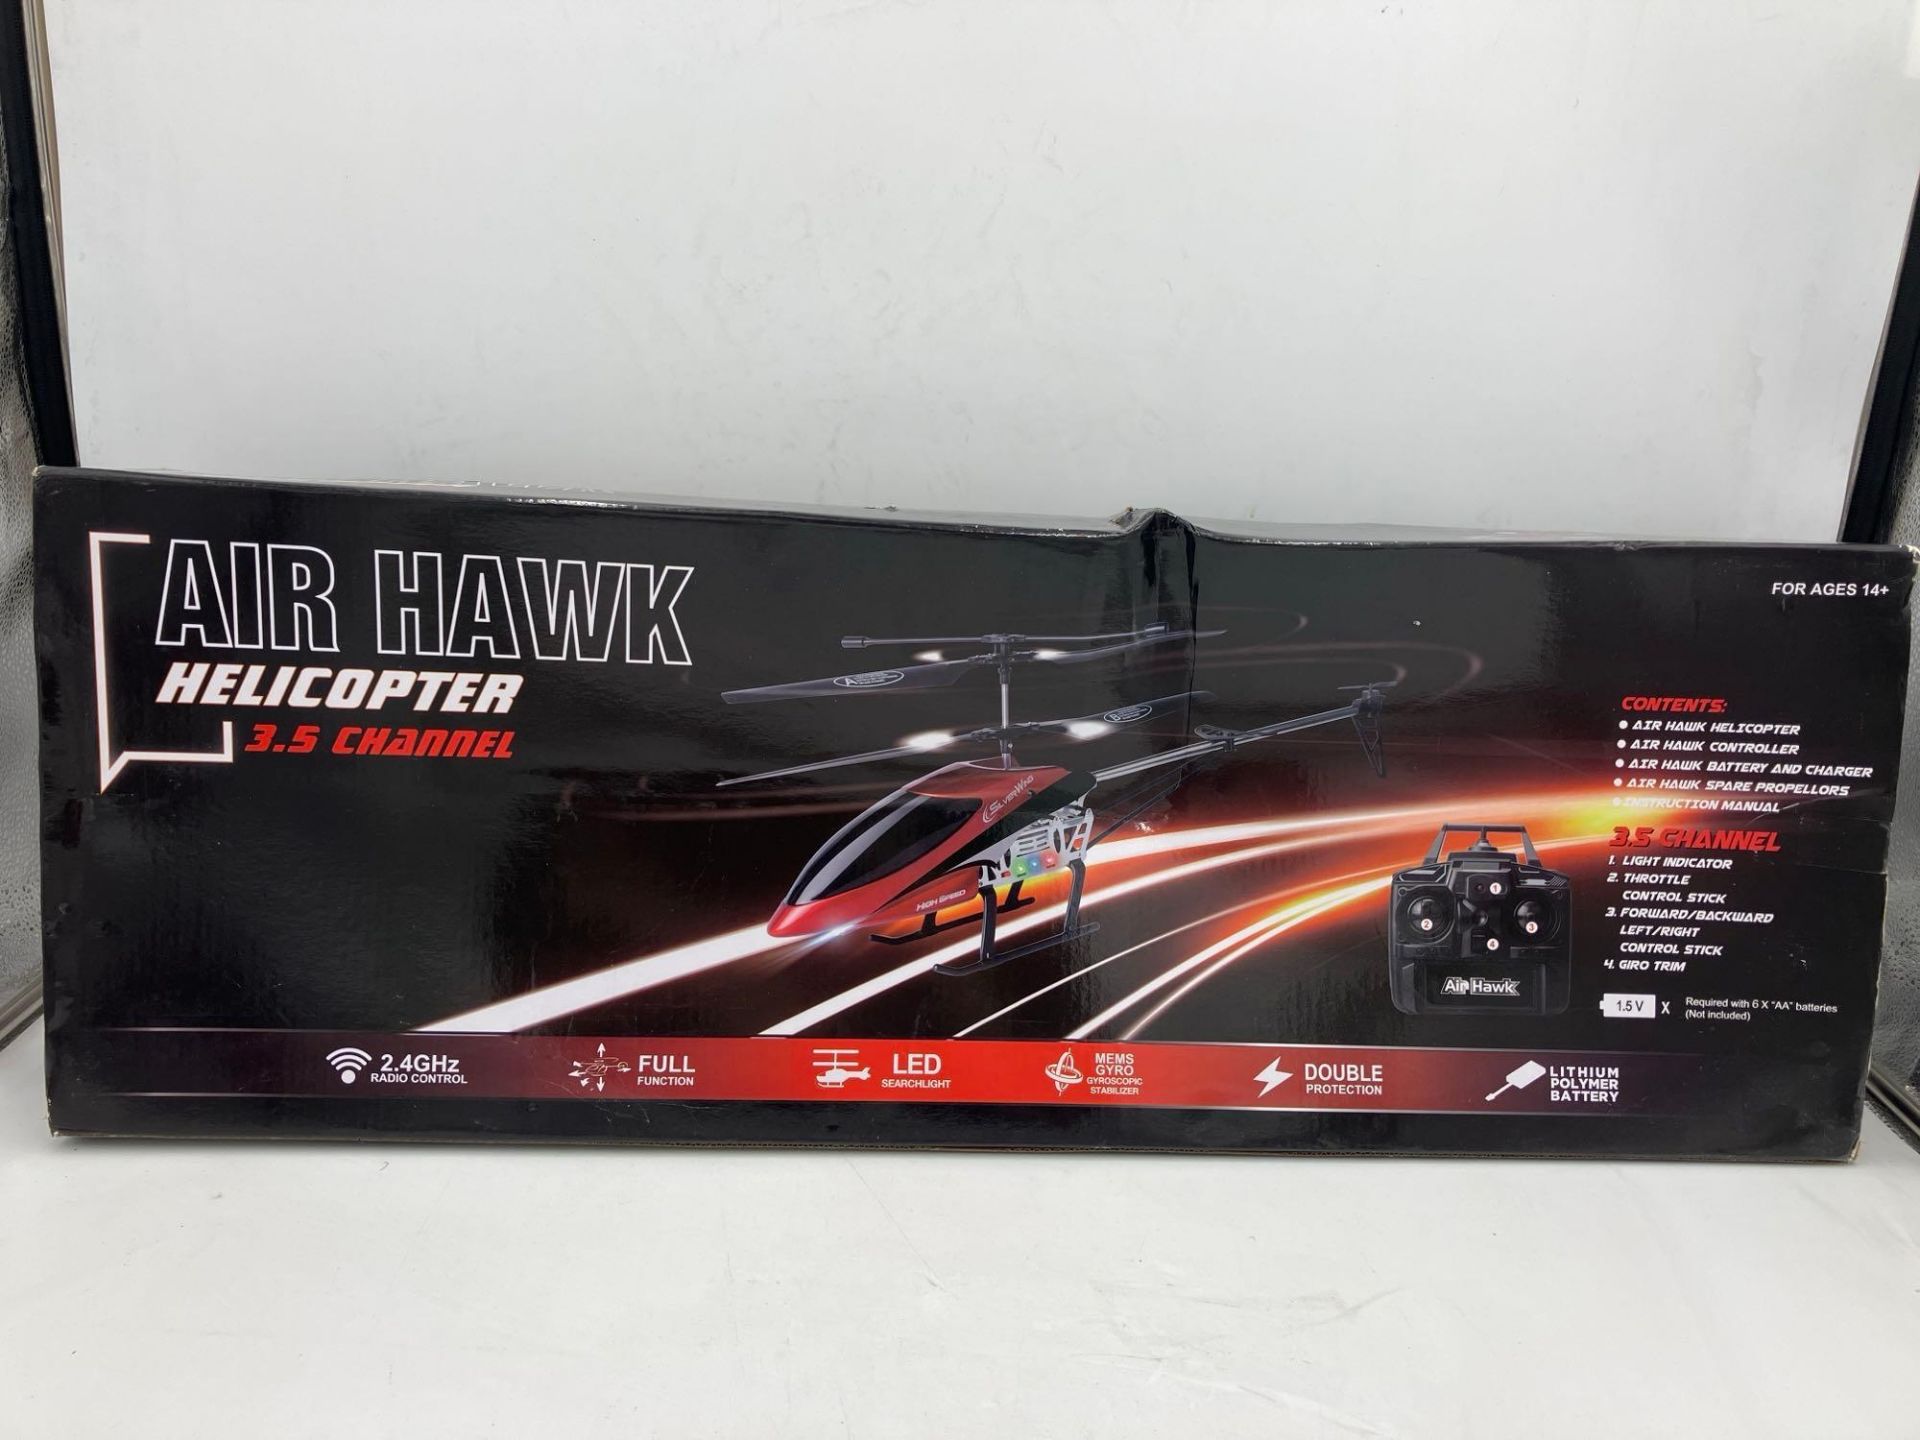 AIR HAWK HELICOPTER - REMOTE CONTROL - 9748 - Image 2 of 2